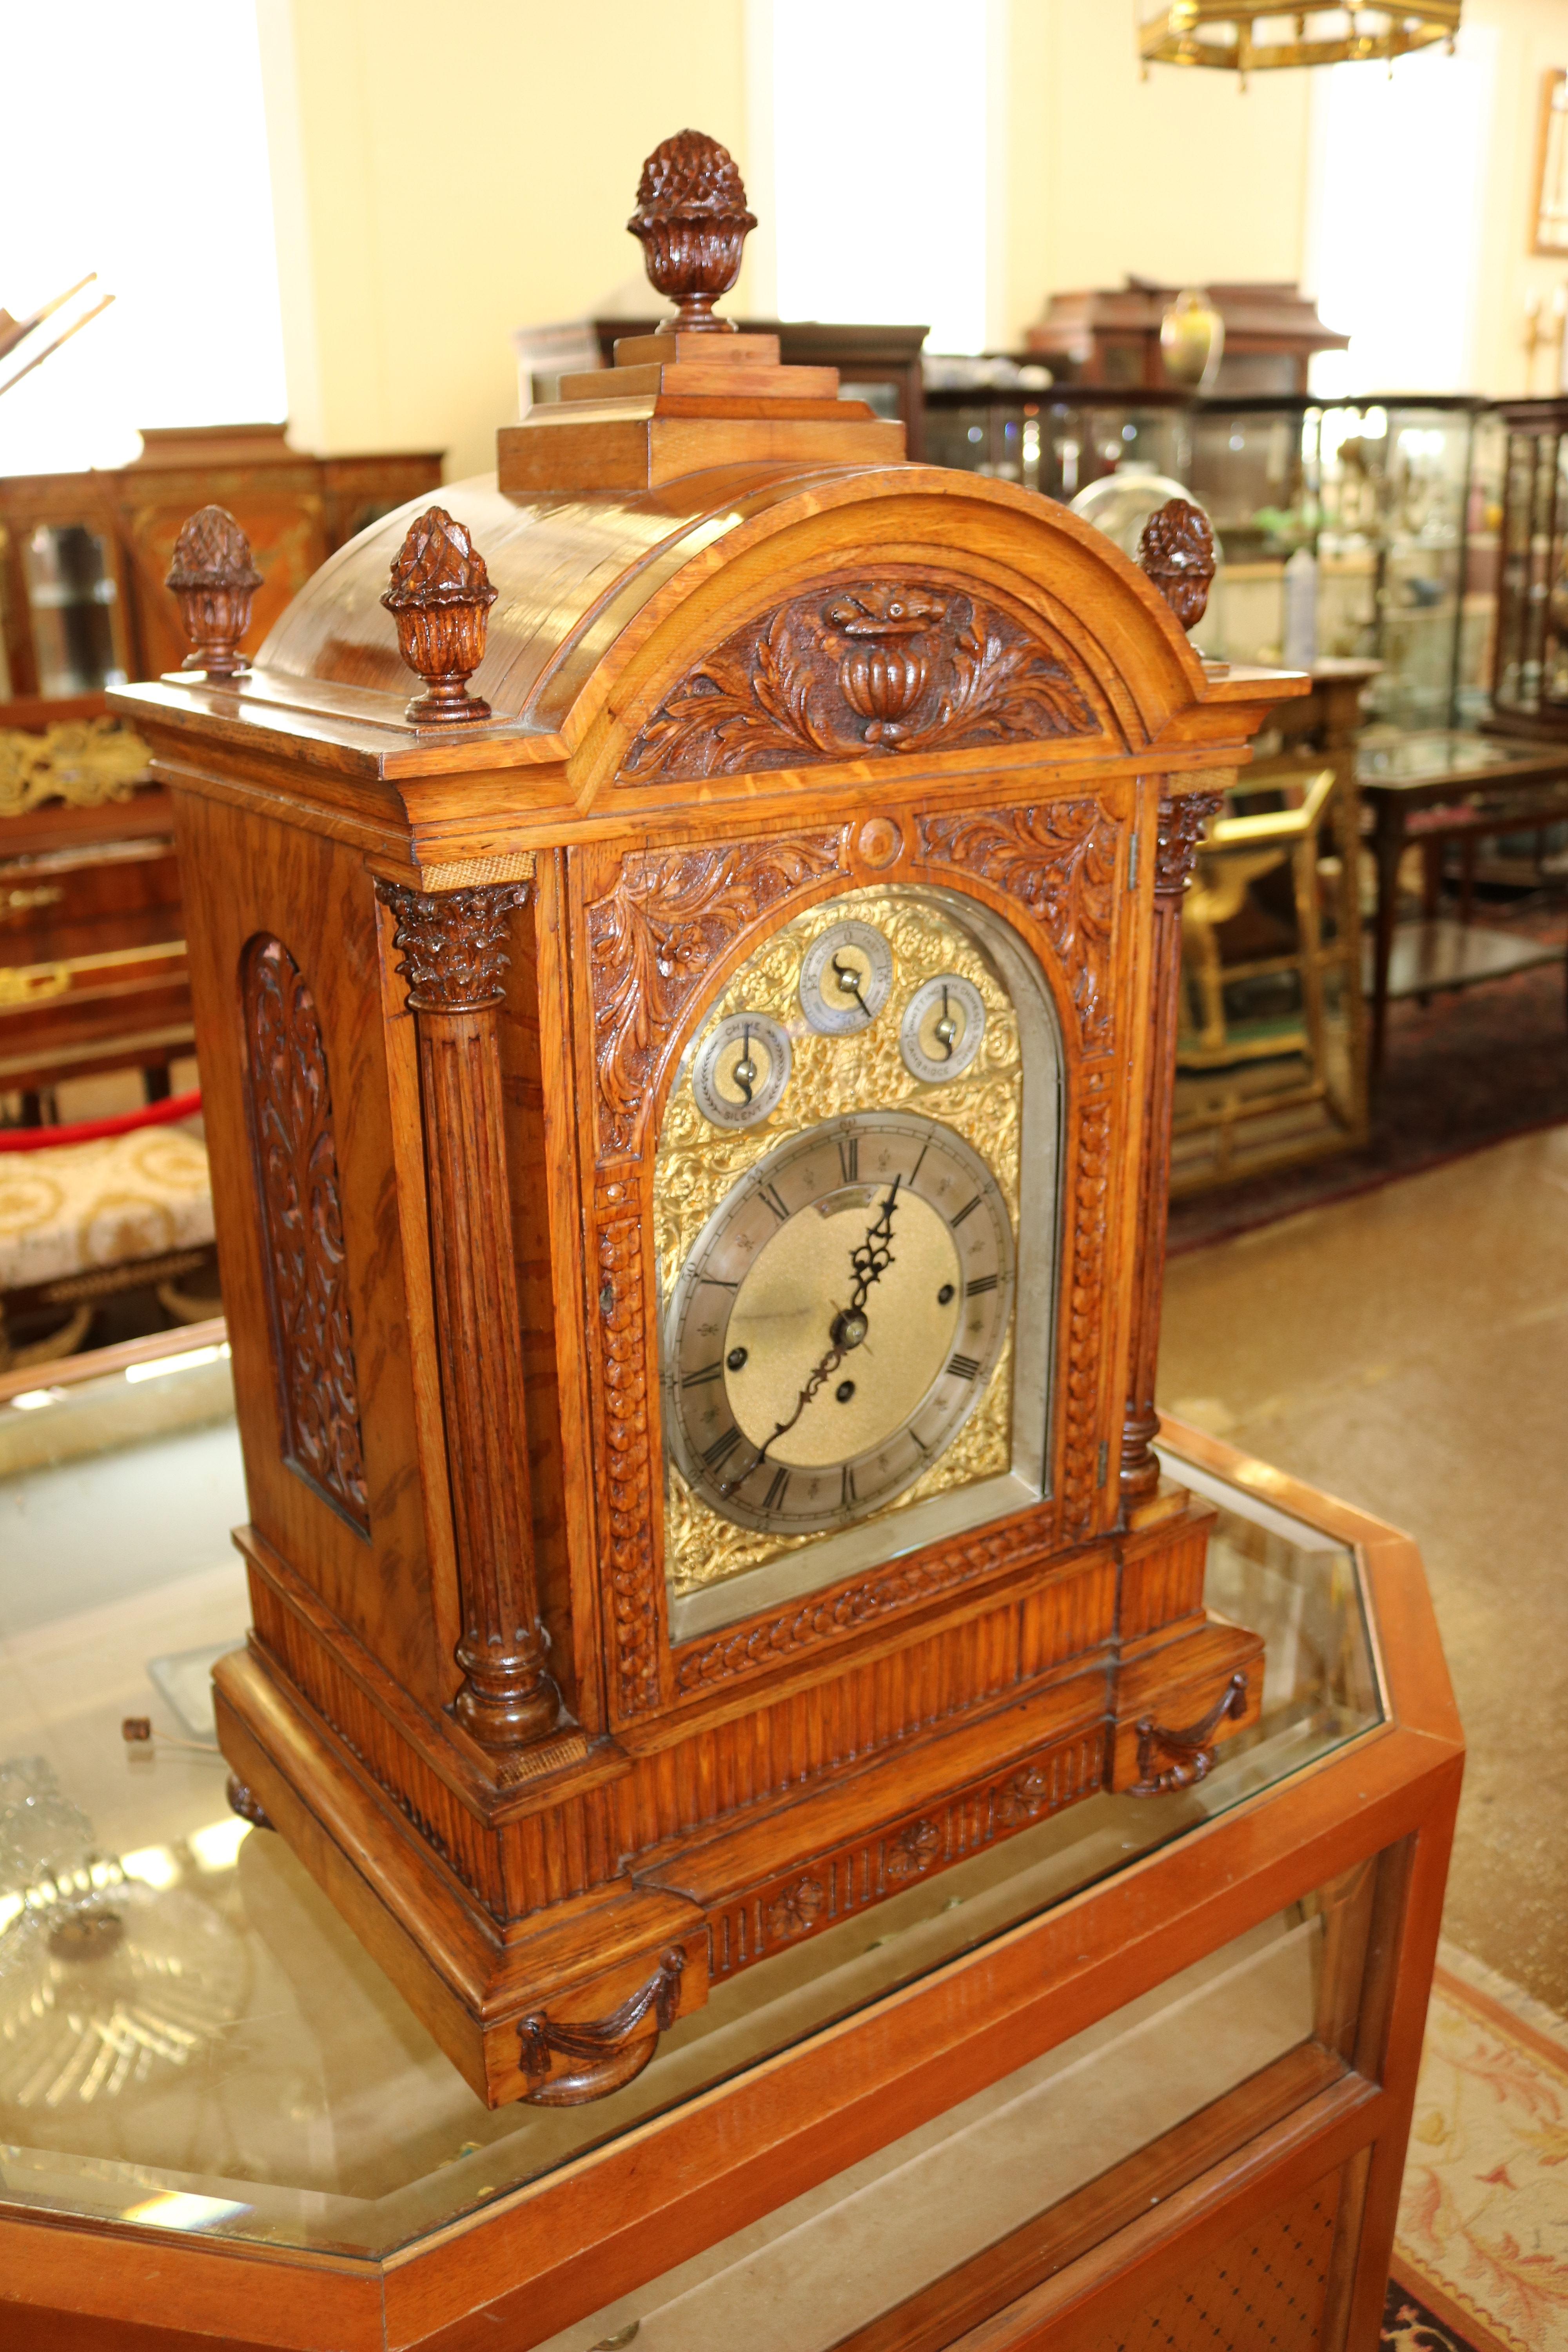 grandfather clock is slow